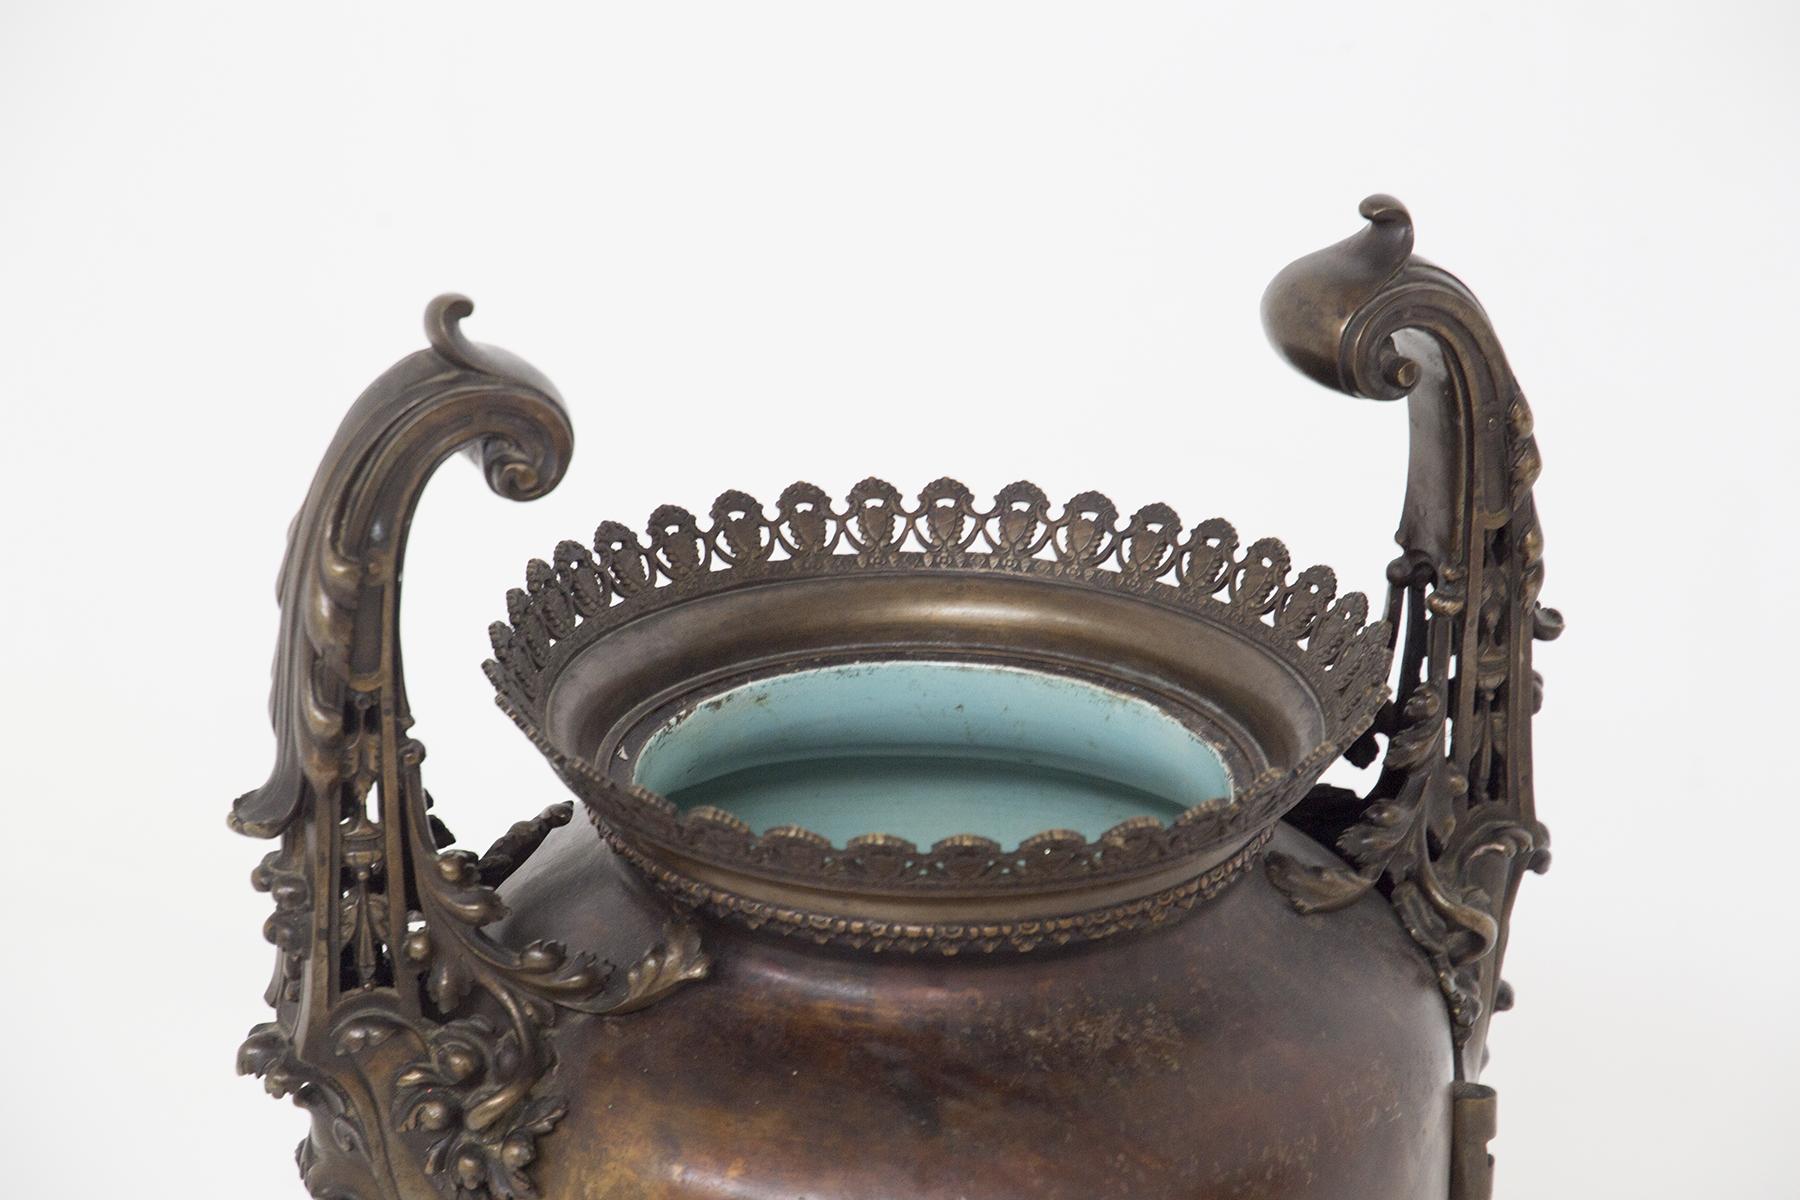 Large painted Art Nouveau bronze vase from the early 1900s, fine Italian manufacture.
The vase has a round base with four thick, sinuous feet, reminiscent of those on old stoves. The four feet are grandly decorated: in fact, in addition to curling